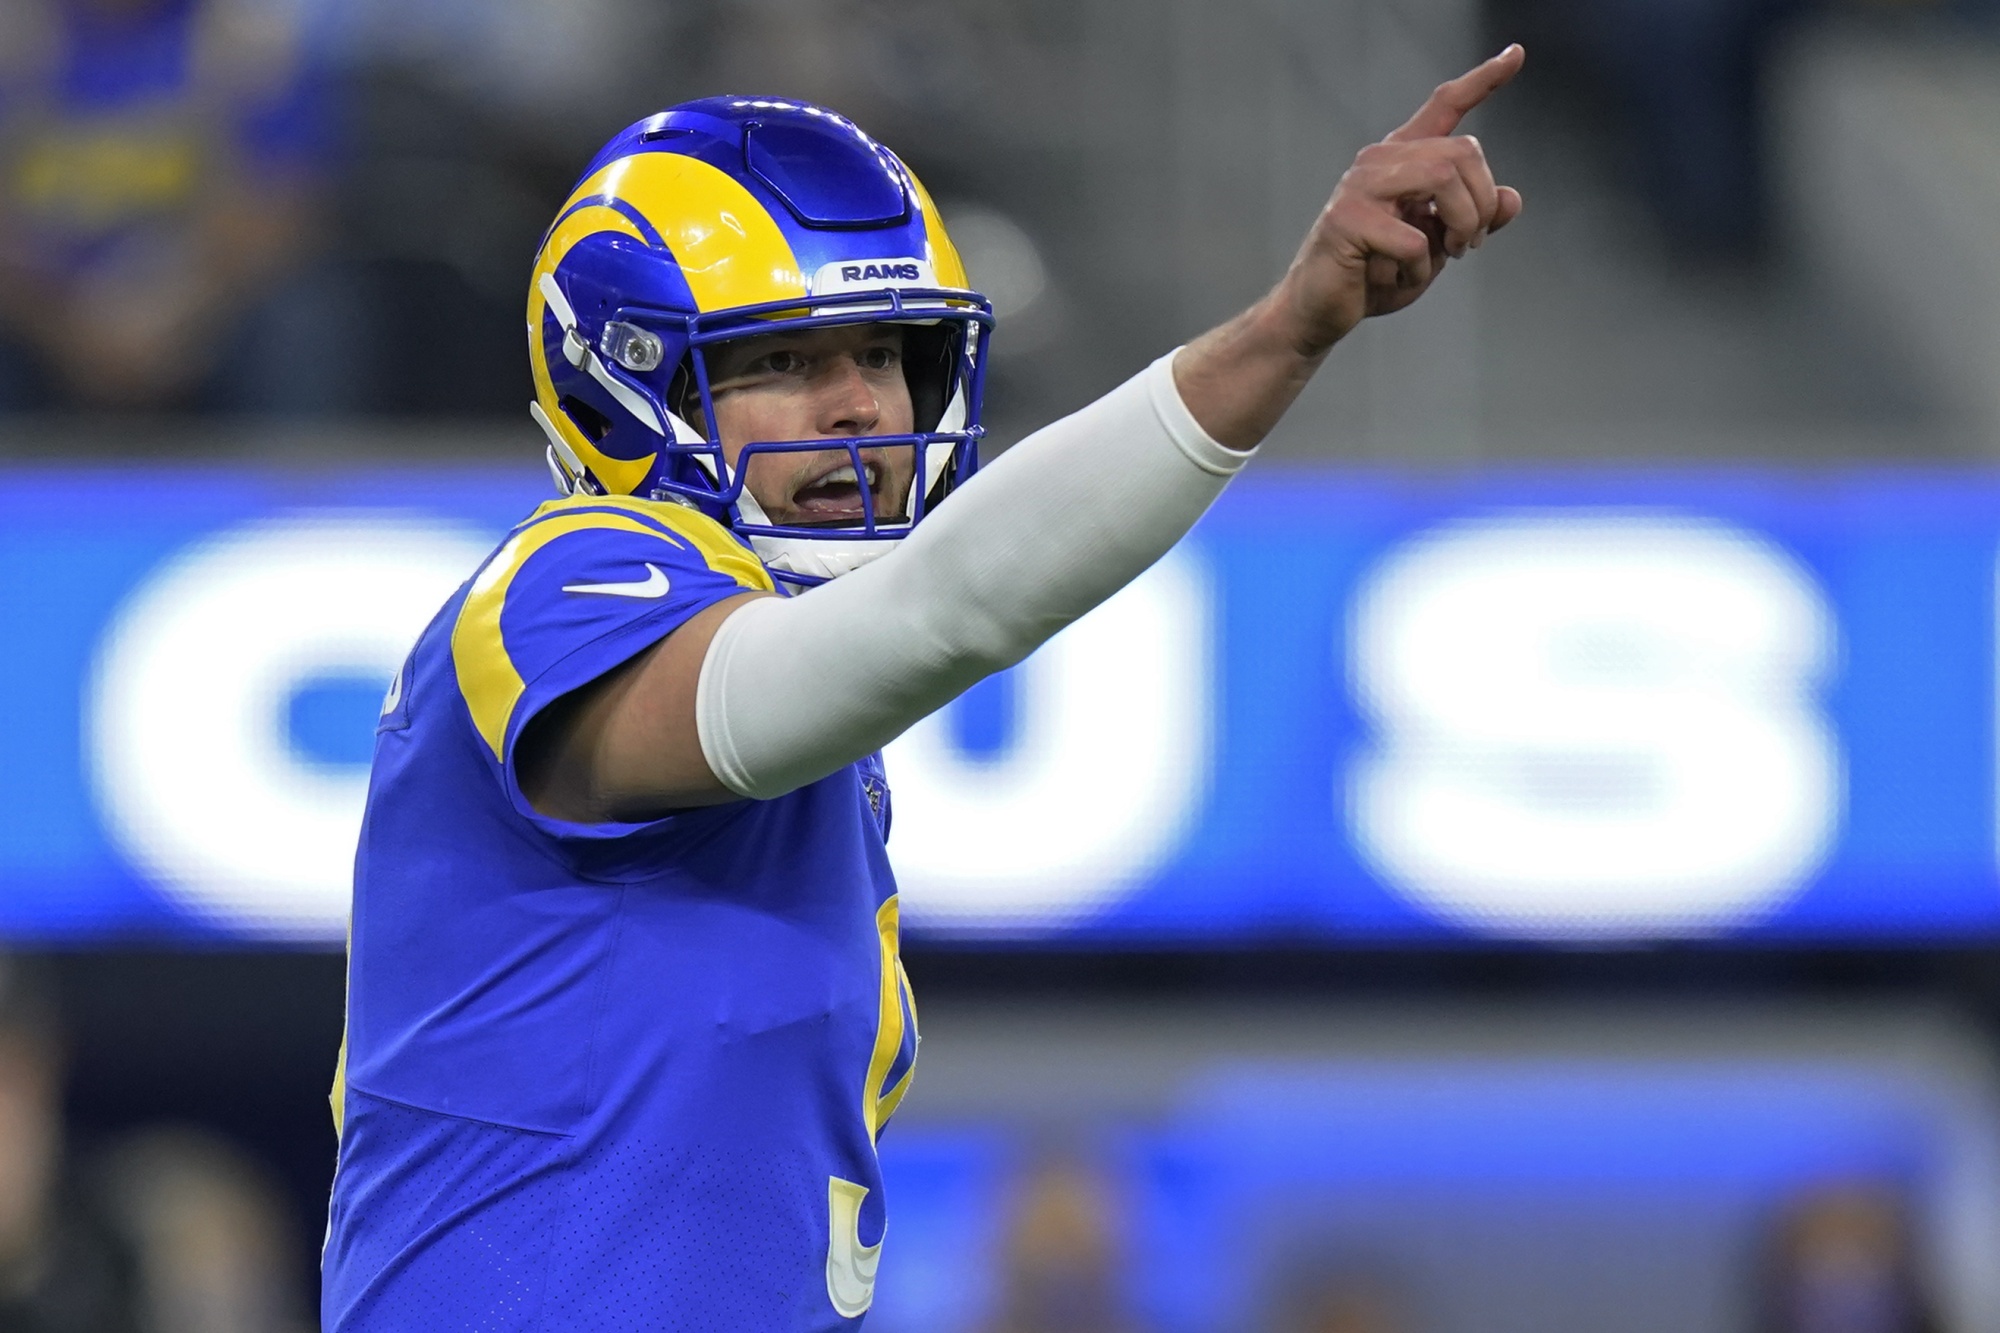 Stafford Propels Rams Past Cardinals 34-11 in Playoff Rout - Bloomberg